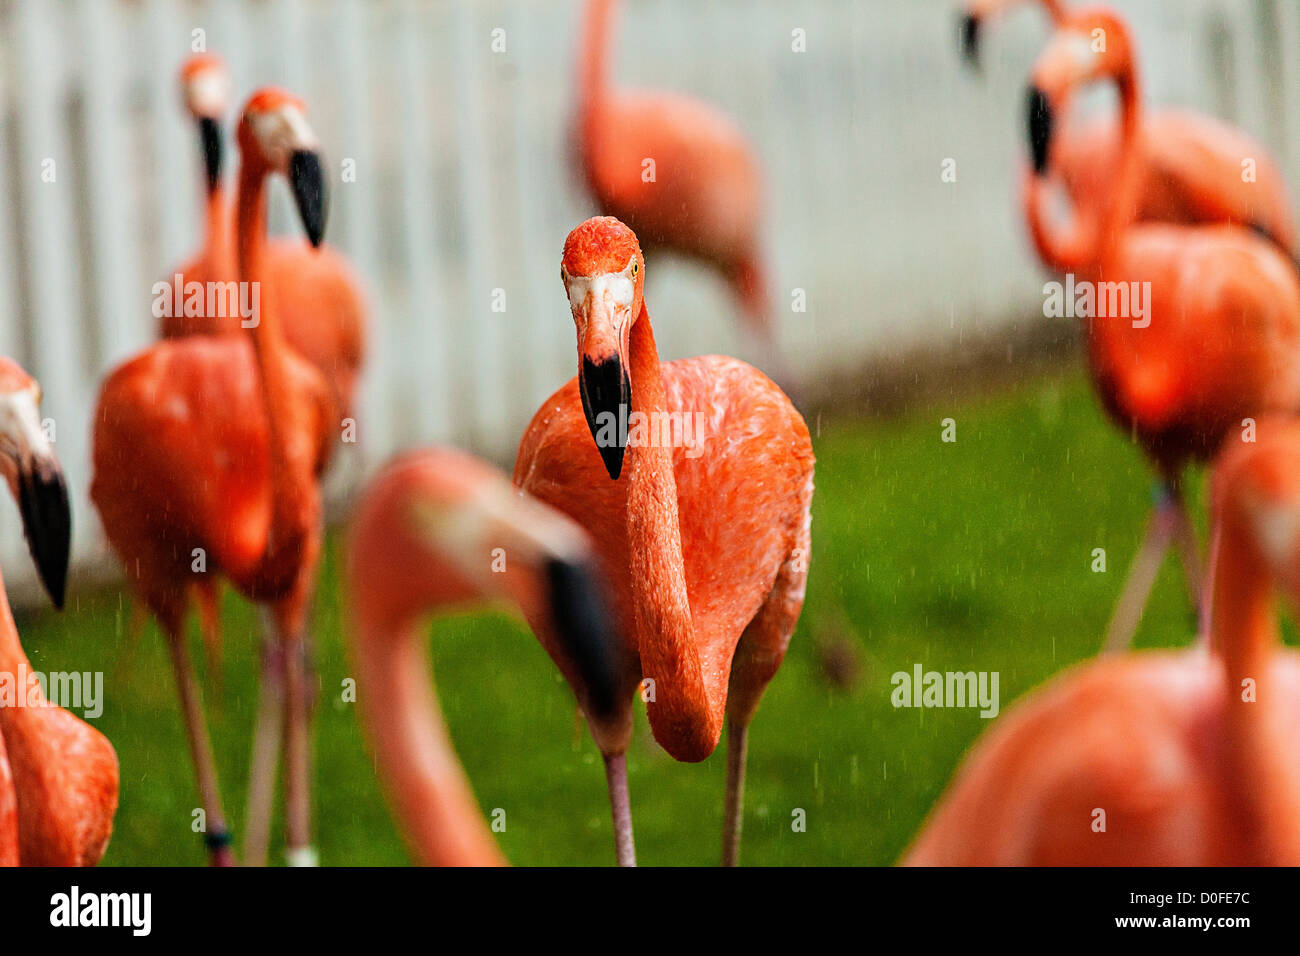 Caribbean flamingos perform their daily march at the Ardastra Gardens Zoo and Conservation Center in Nassau, The Bahamas. Stock Photo